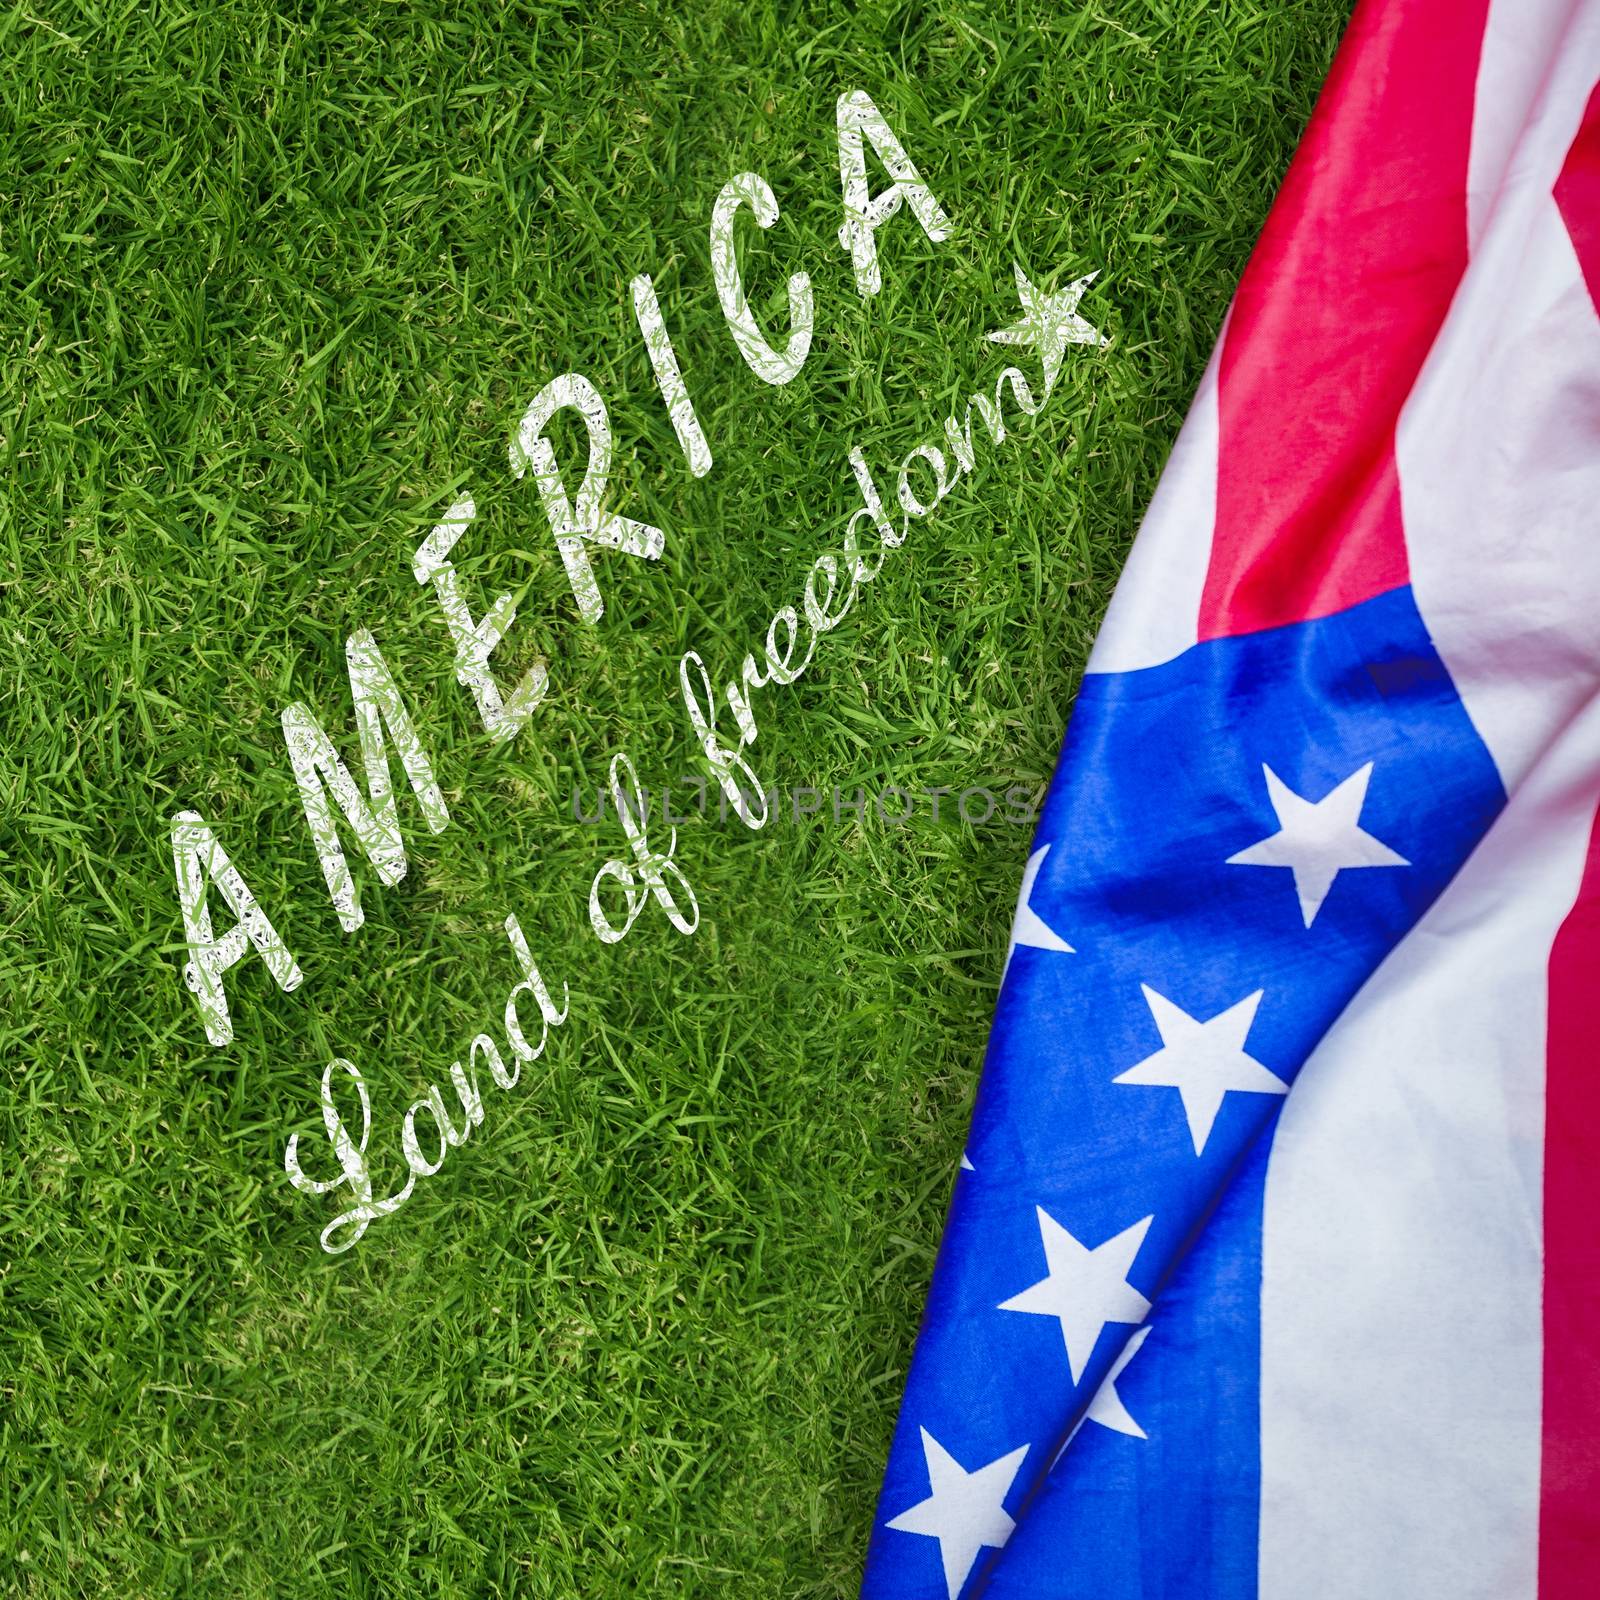 Colorful happy 4th of july text against white background against closed up view of grass